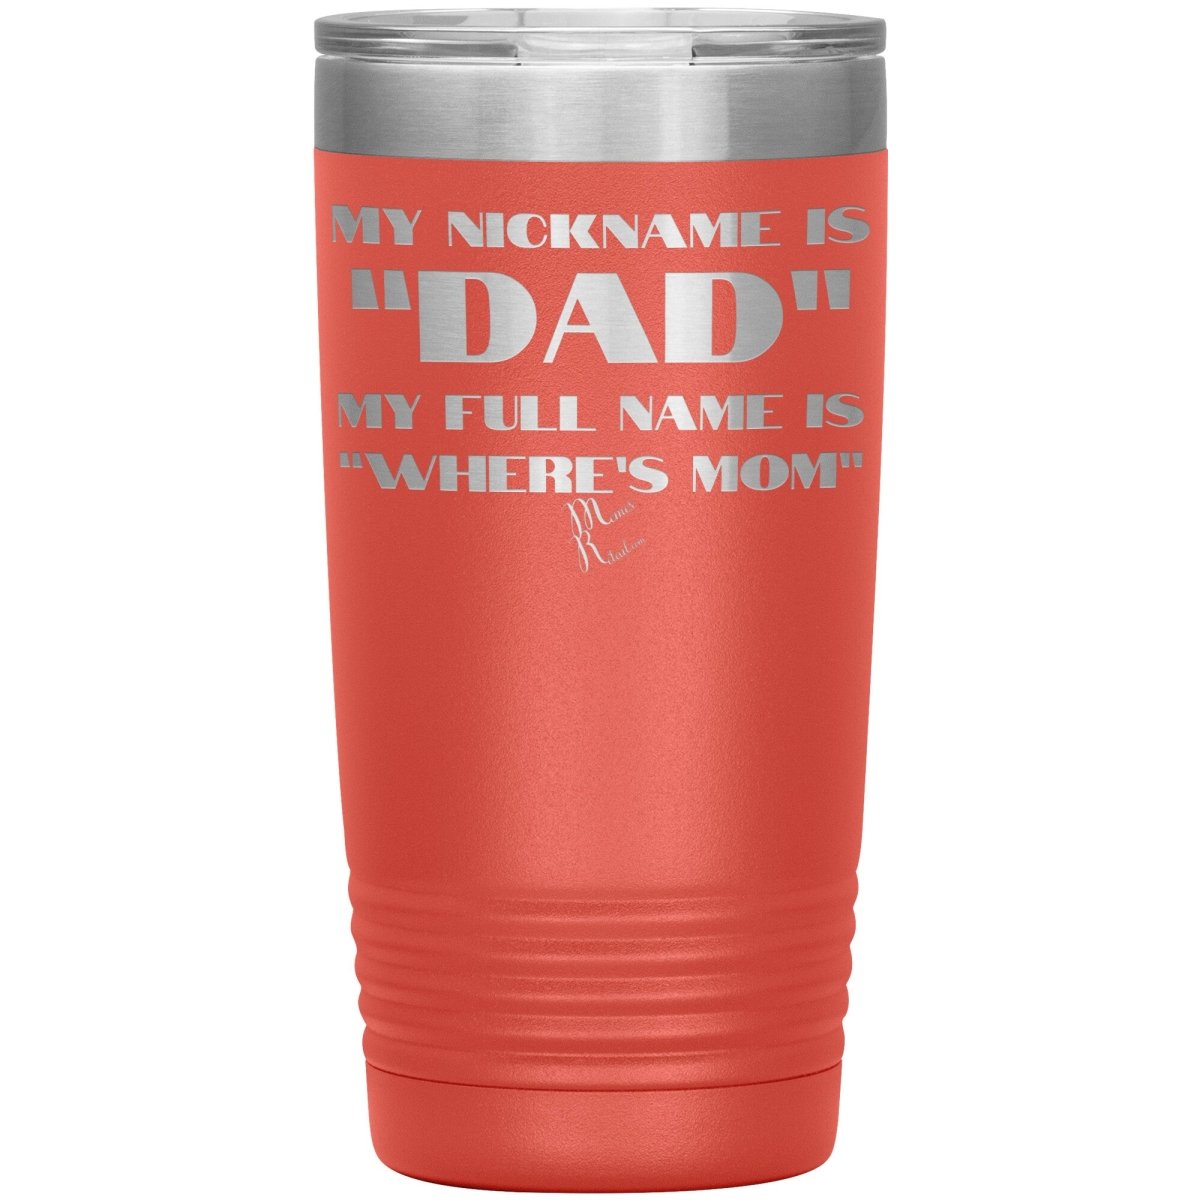 My Nickname is "Dad", My Full Name is "Where's Mom" Tumblers, 20oz Insulated Tumbler / Coral - MemesRetail.com